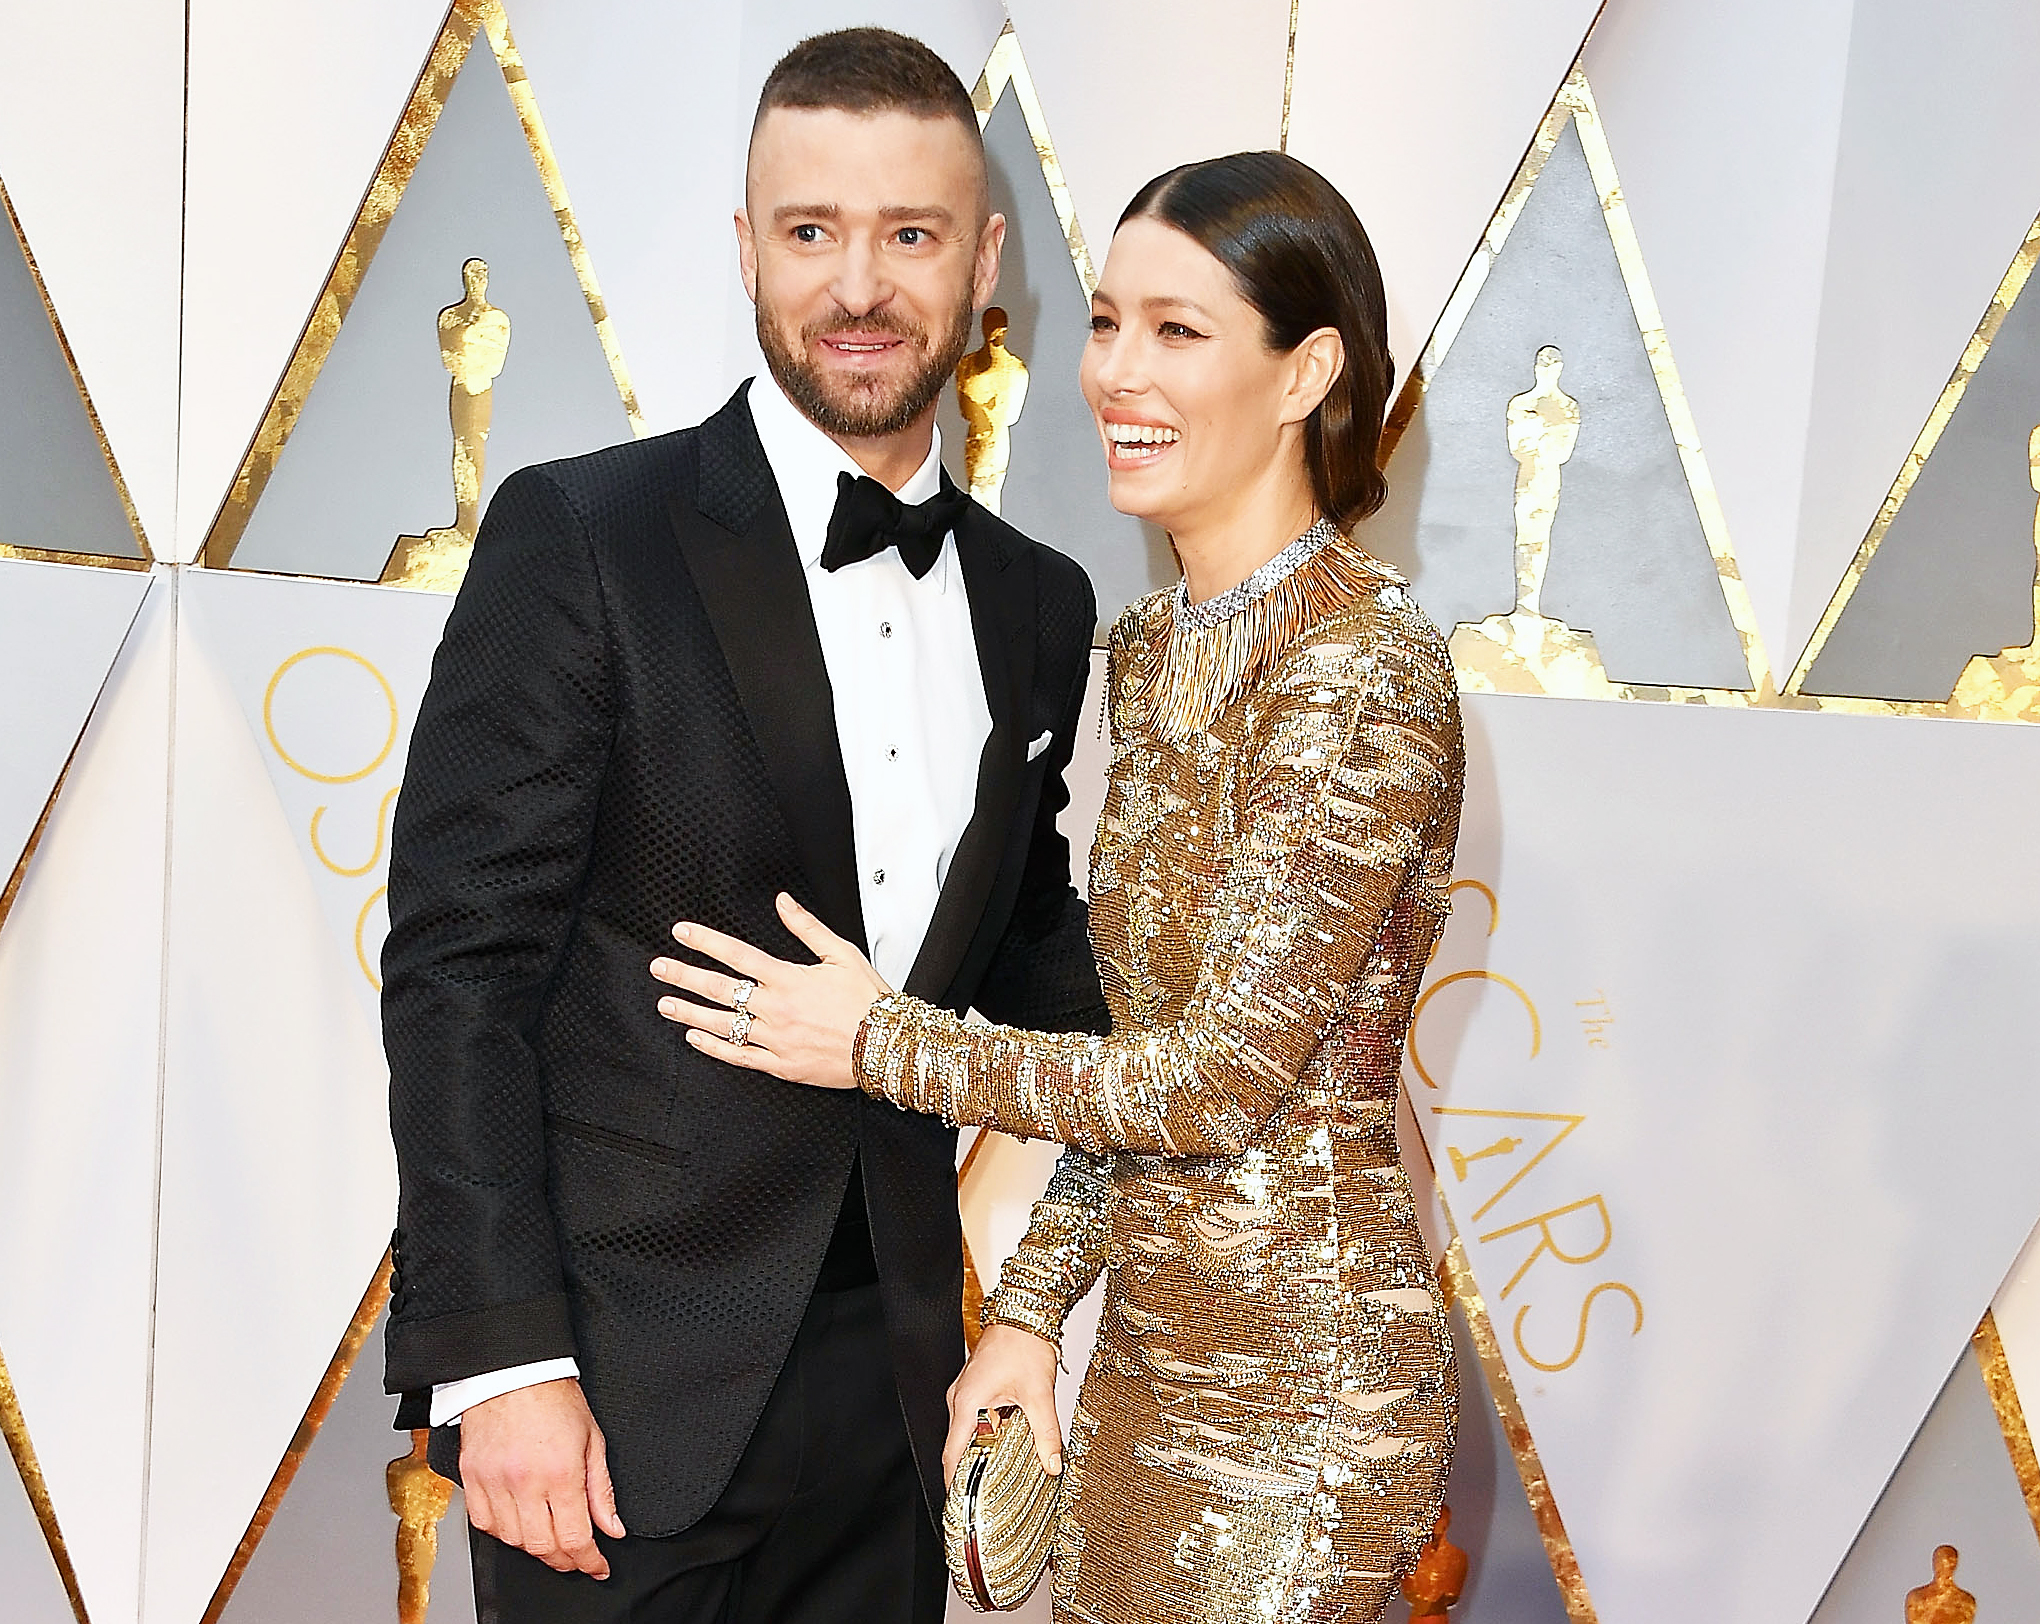 Jessica Biel shares photo with Justin Timberlake, sons: 'Thankful for my  guys' – WSOC TV